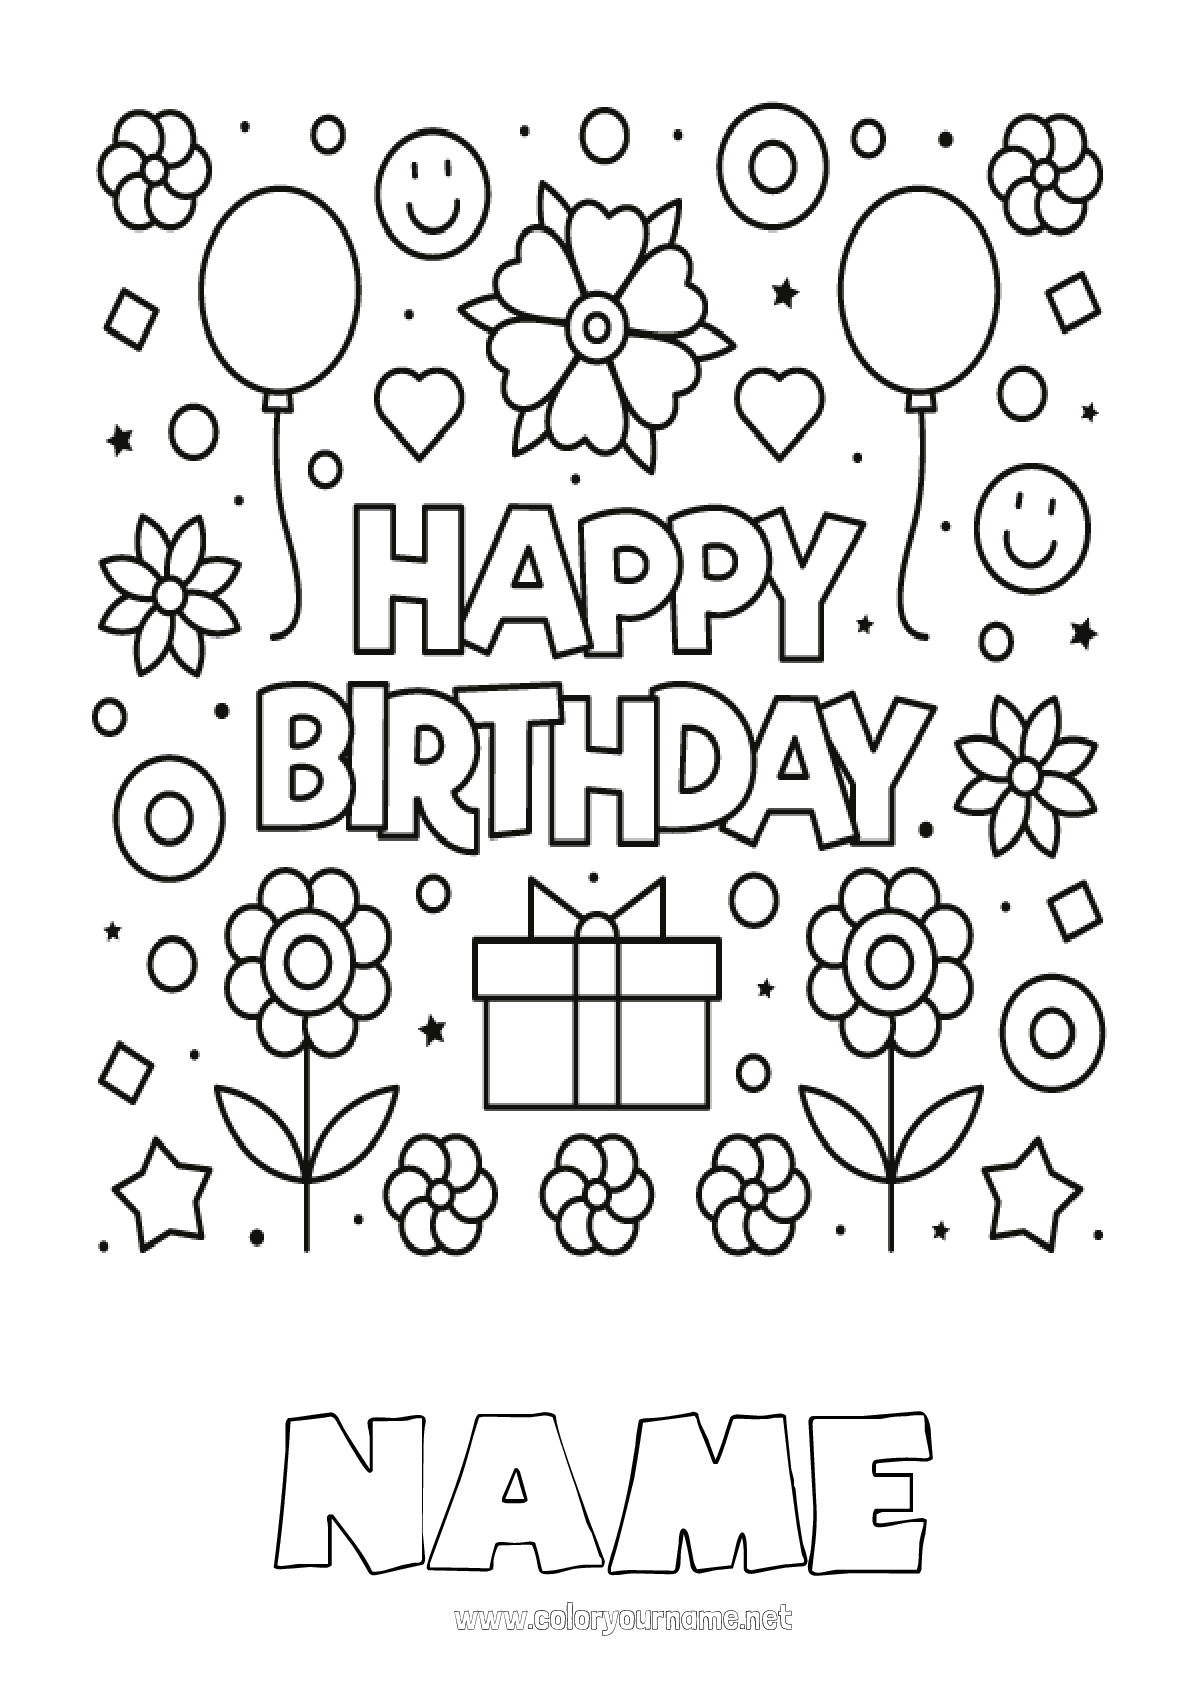 Happy Birthday ! : 98 free customizable coloring pages to print